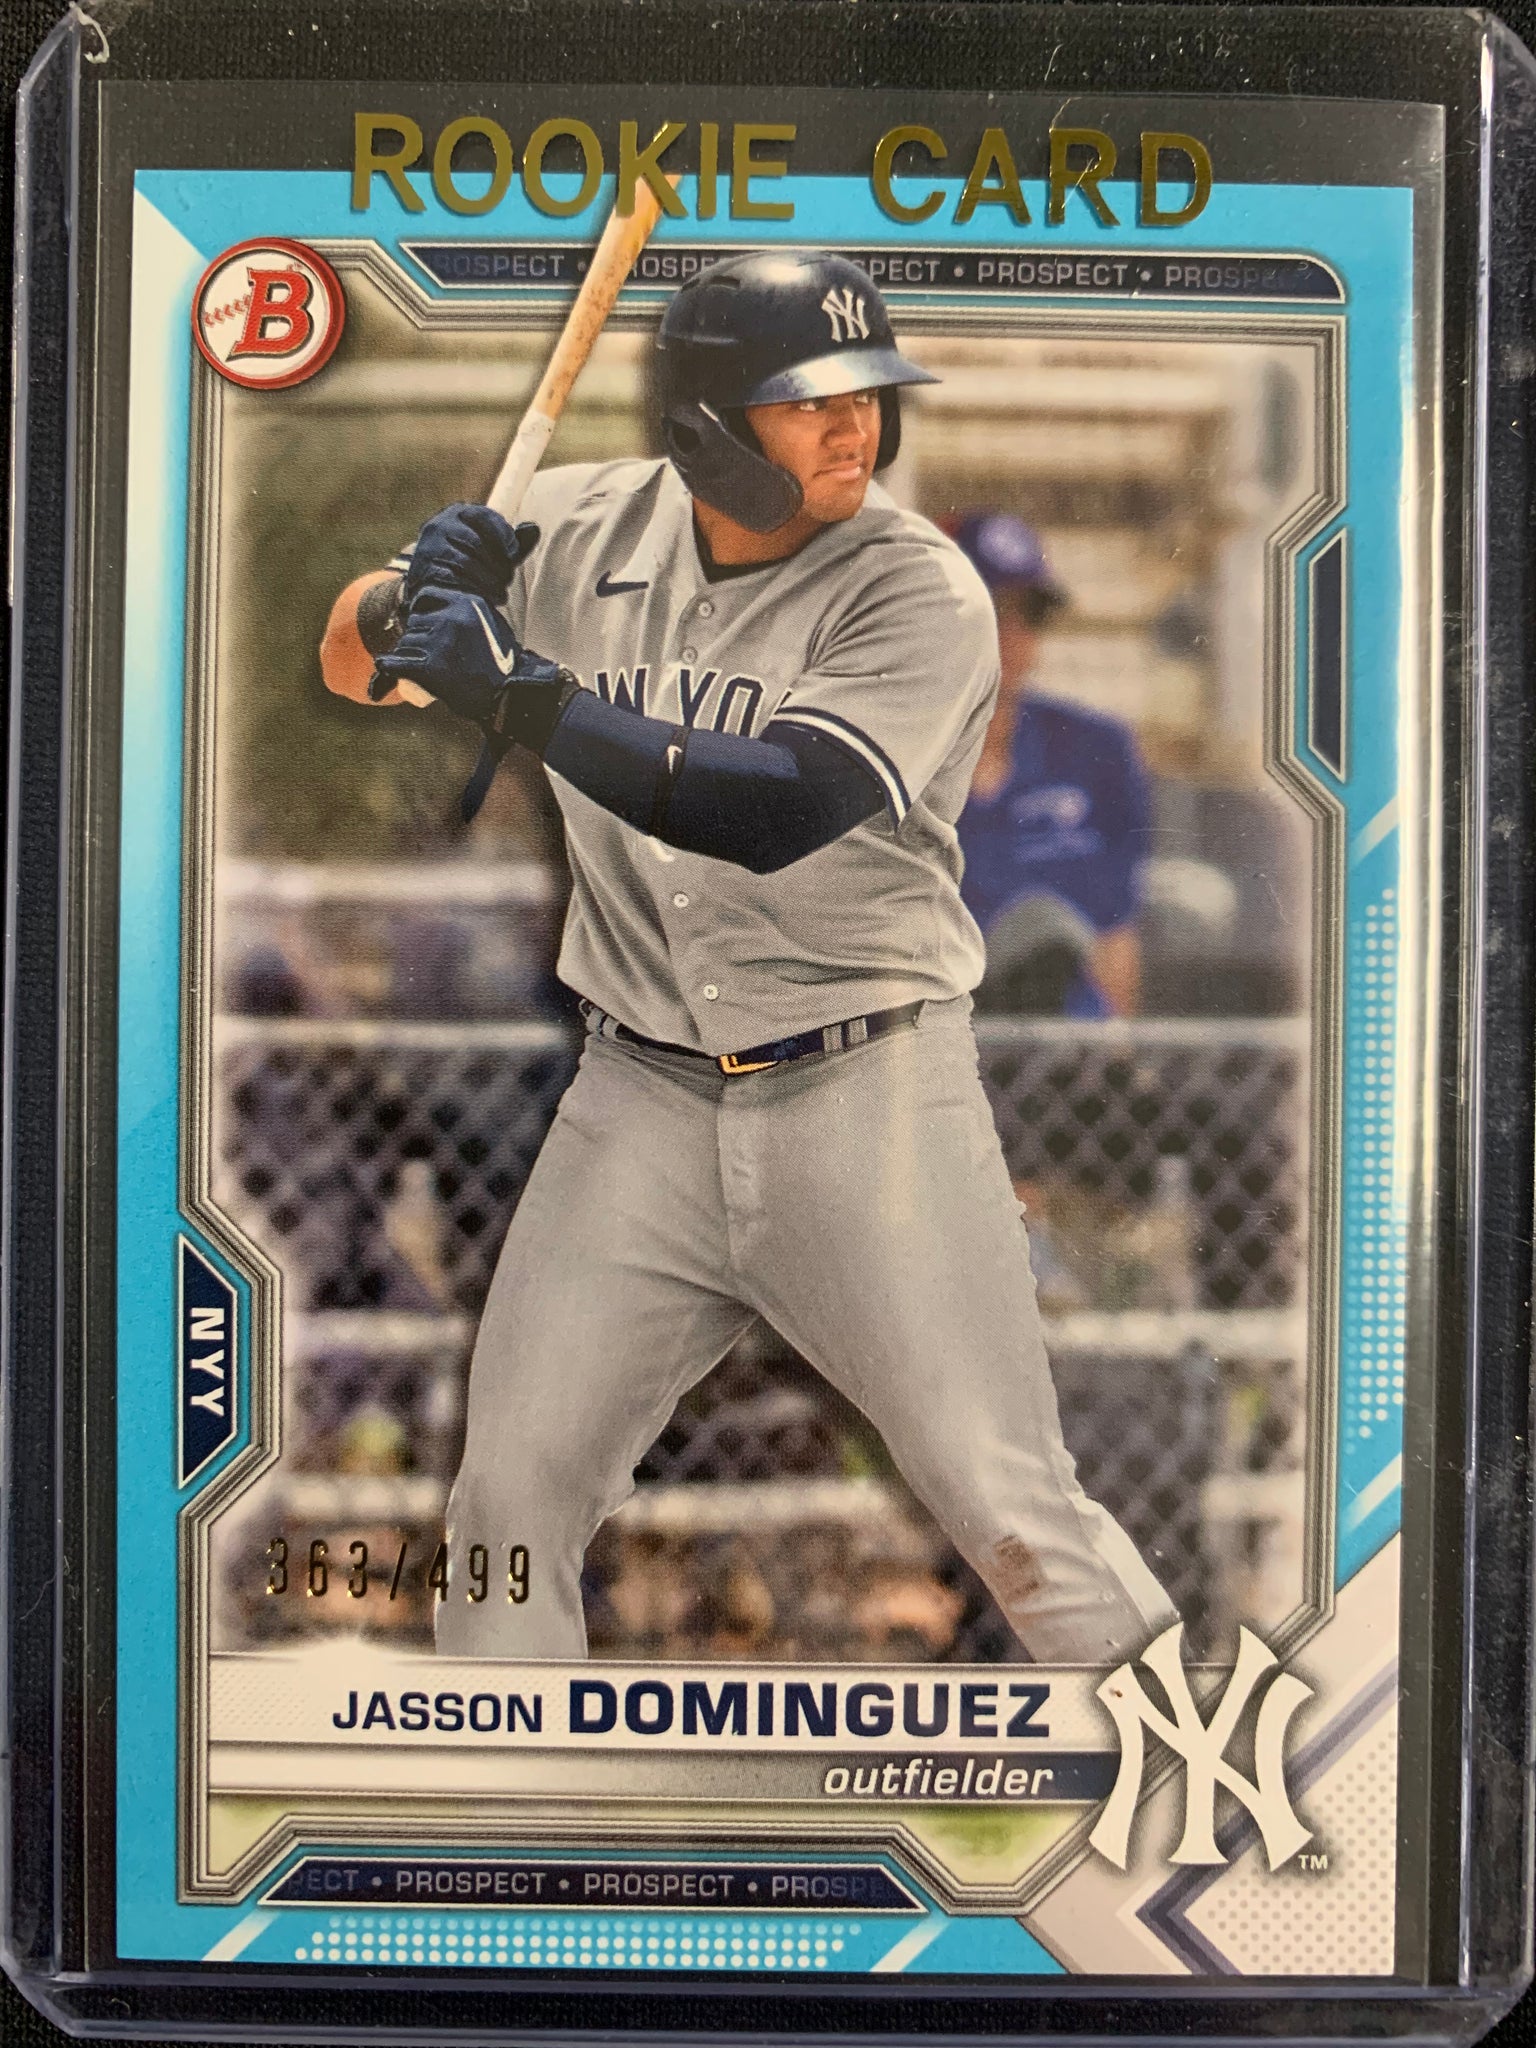 2021 BOWMAN DRAFT BASEBALL #BD-77 NEW YORK YANKEES - JASSON DOMINGUEZ BLUE PROPECTS ROOKIE CARD NUMBERED 363/499